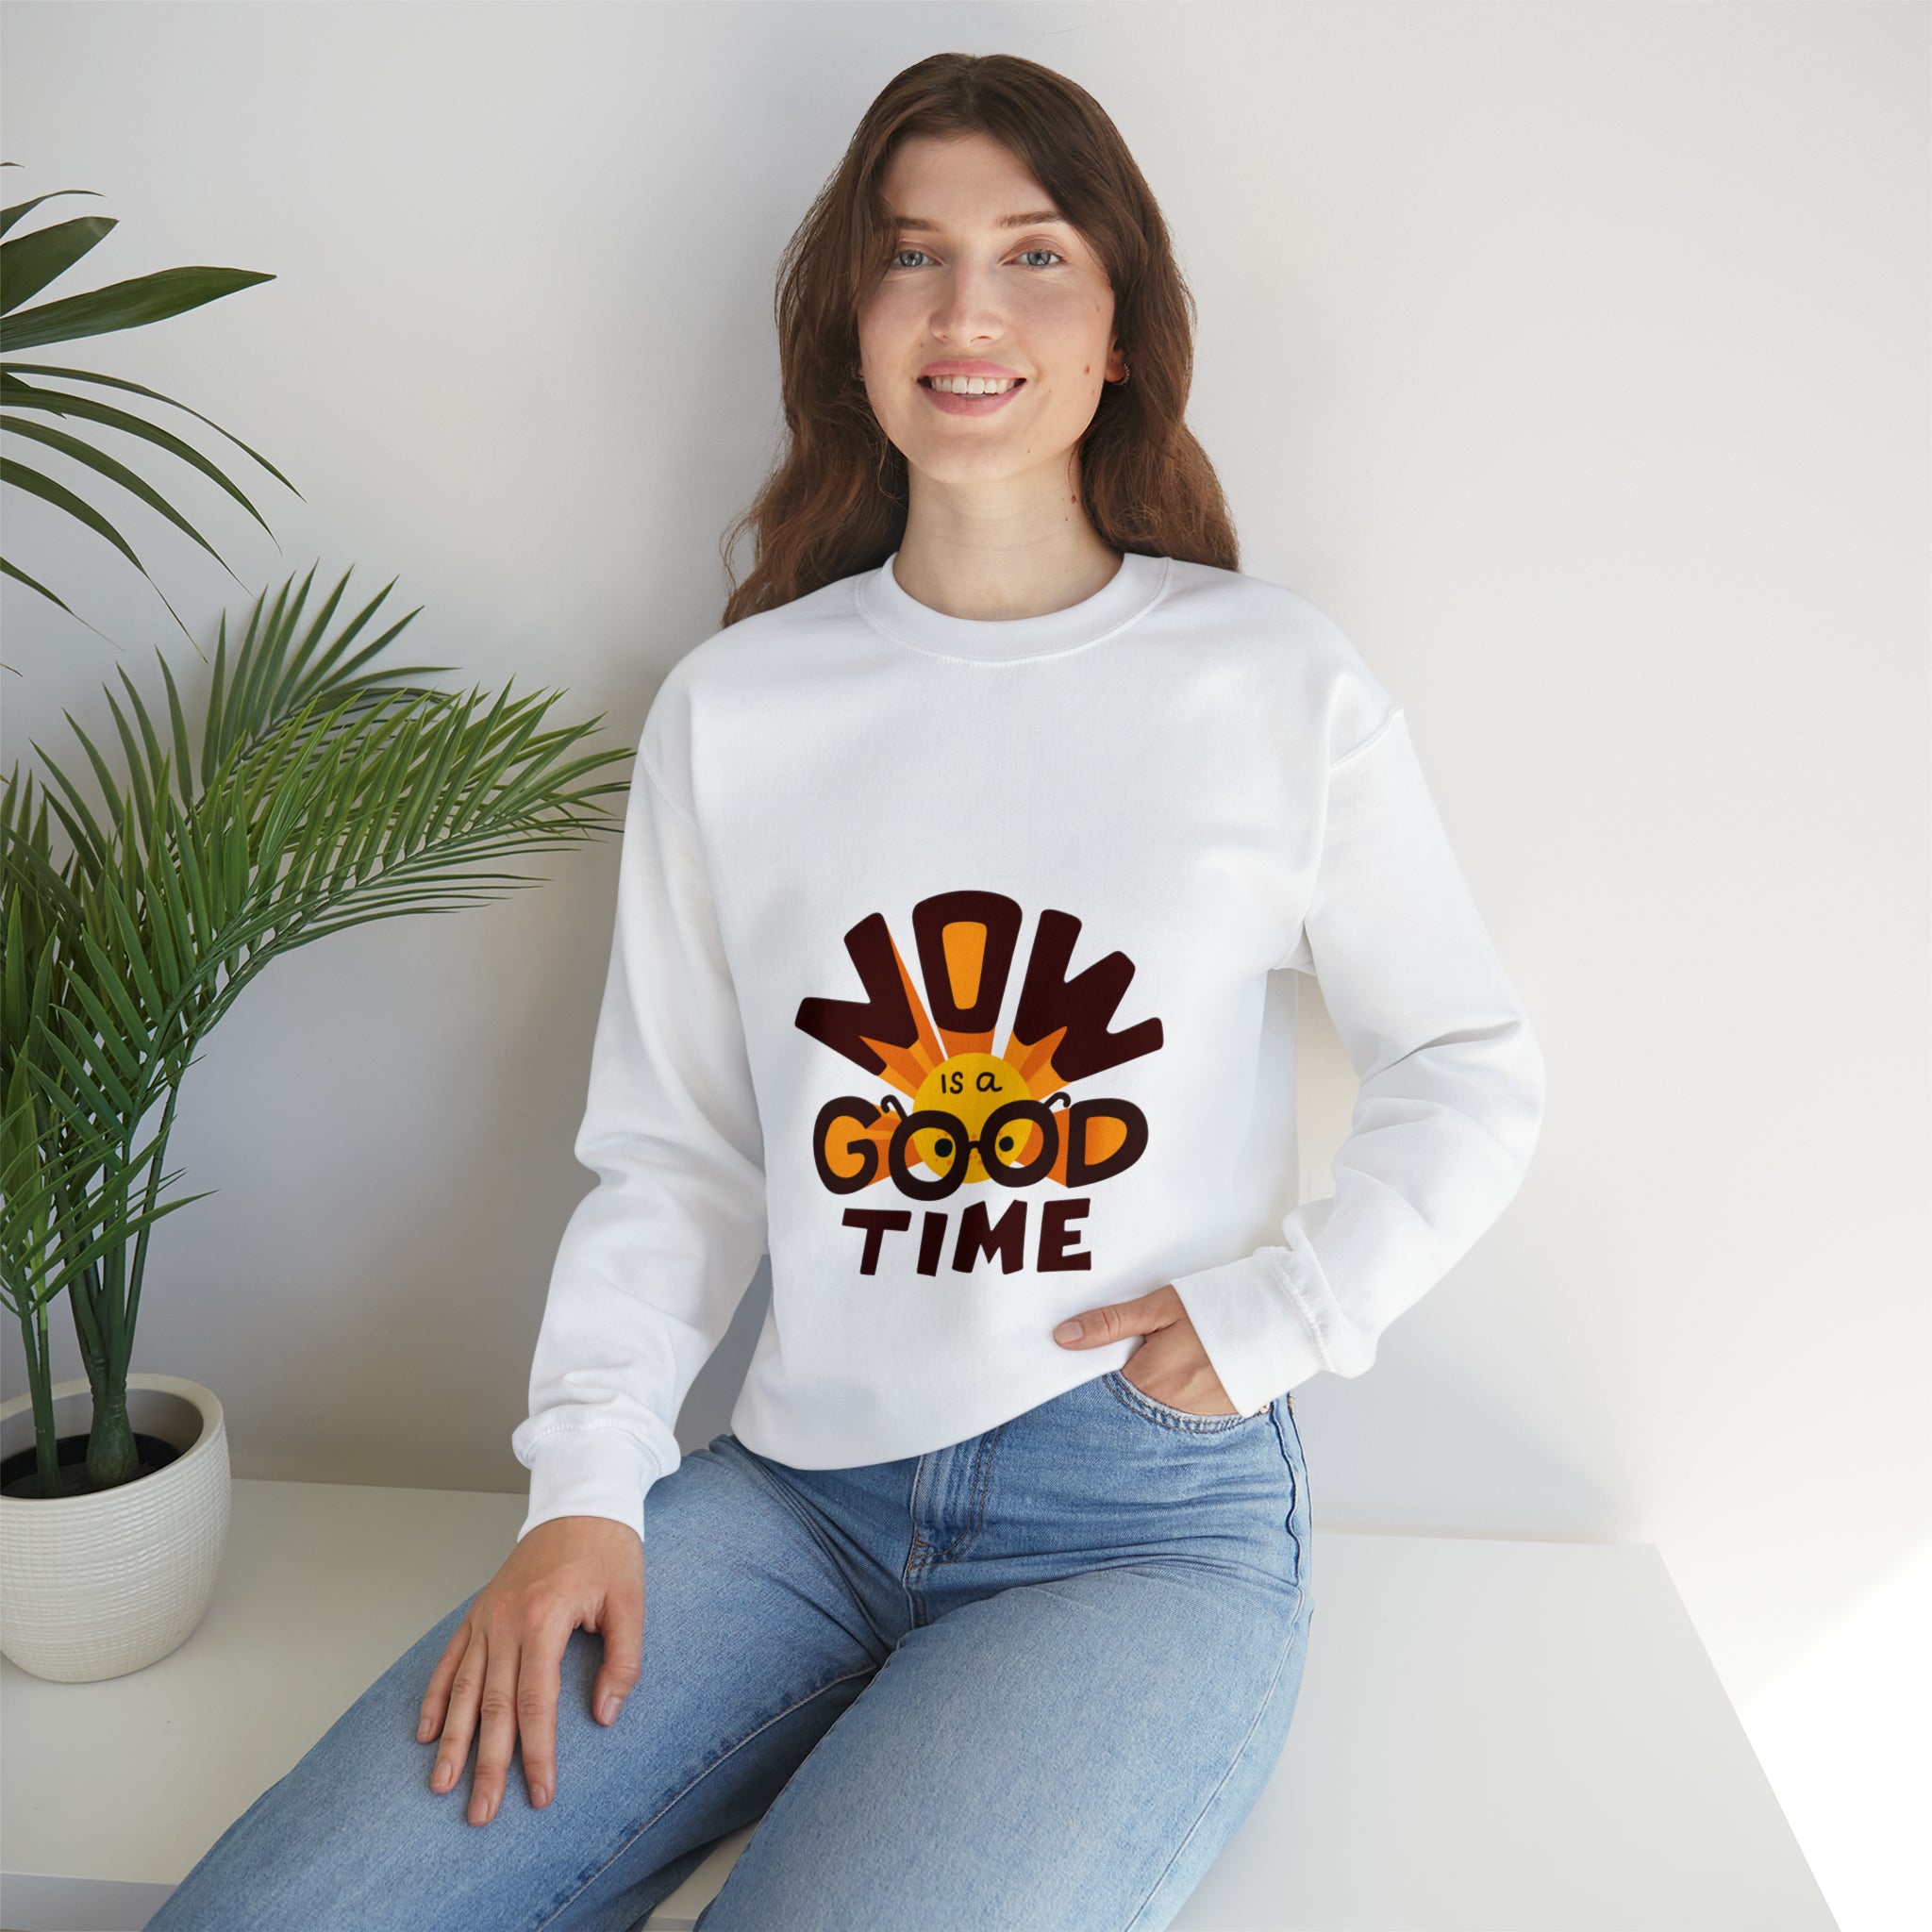 Unisex Heavy Blend Crewneck Sweatshirt for Yoga and Pilates - Personal Hour for Yoga and Meditations 